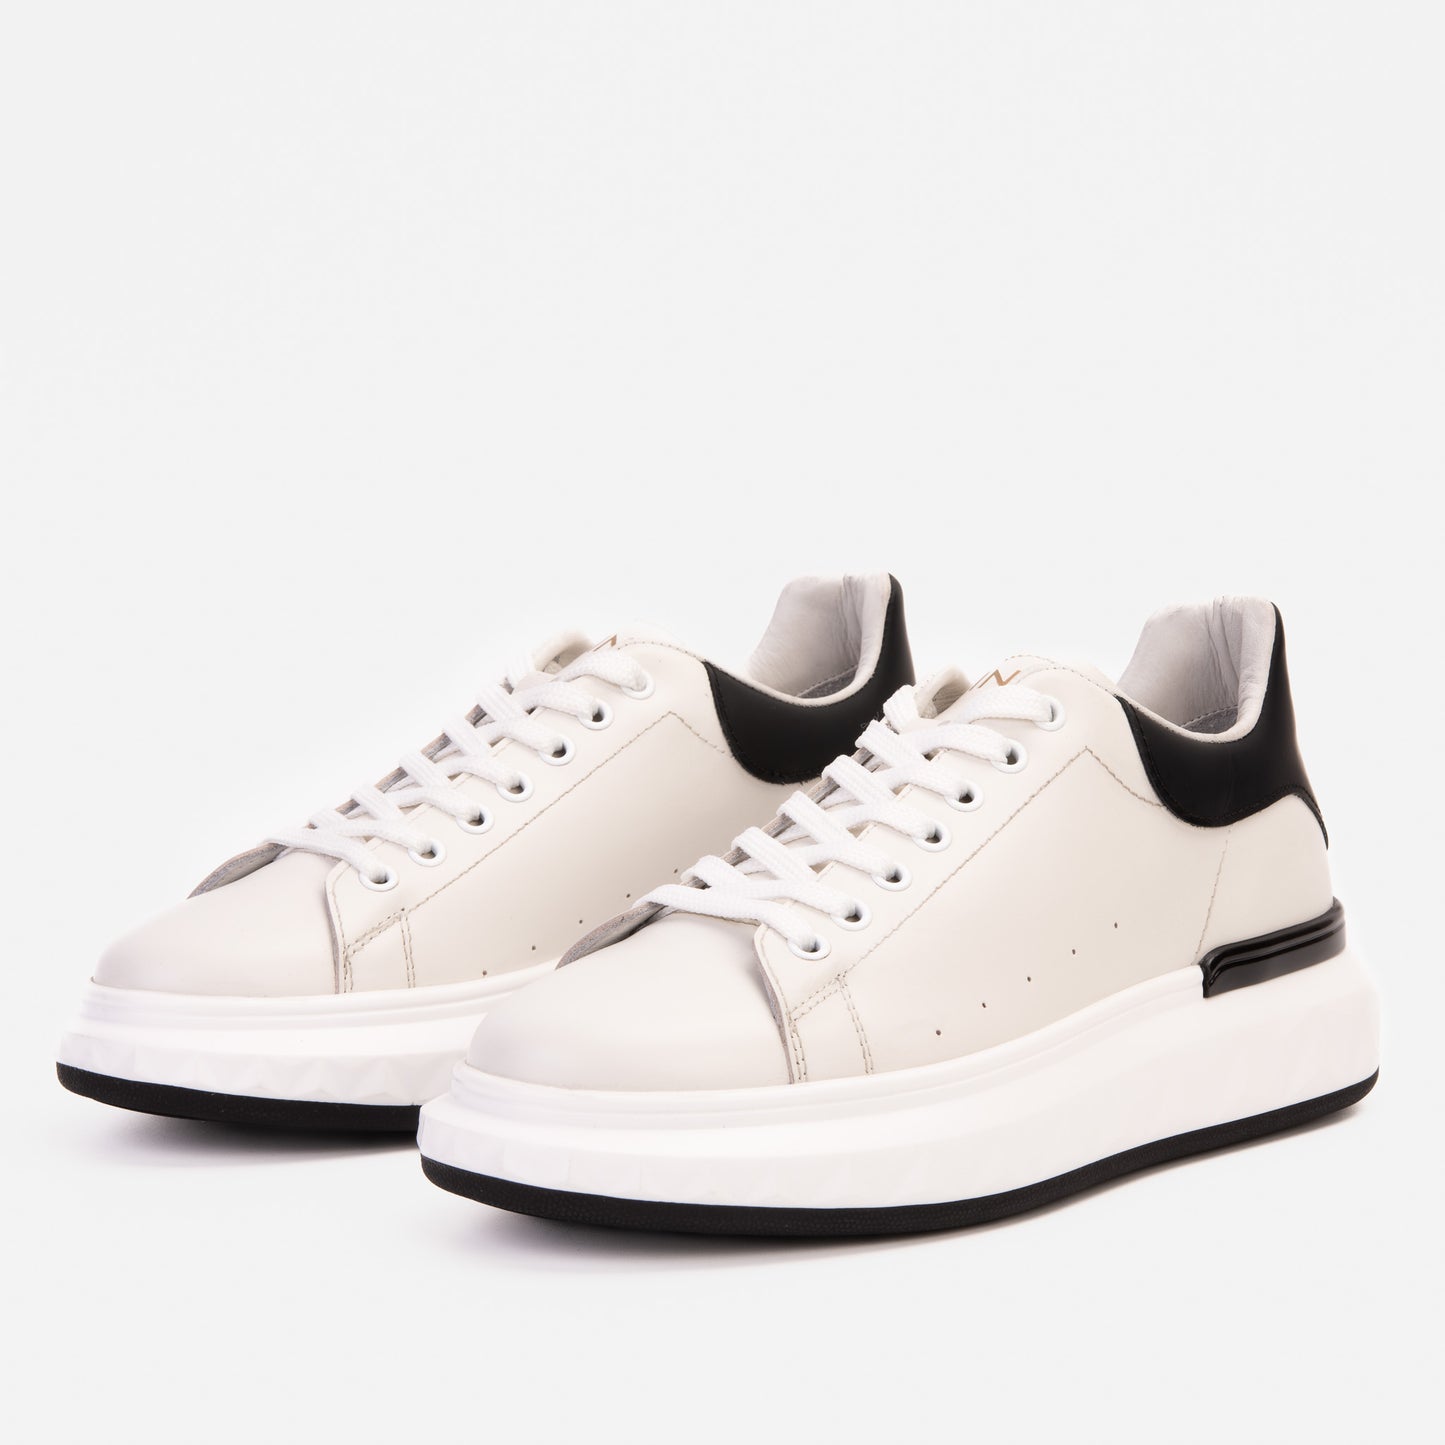 The Linq White Leather Men Sneaker